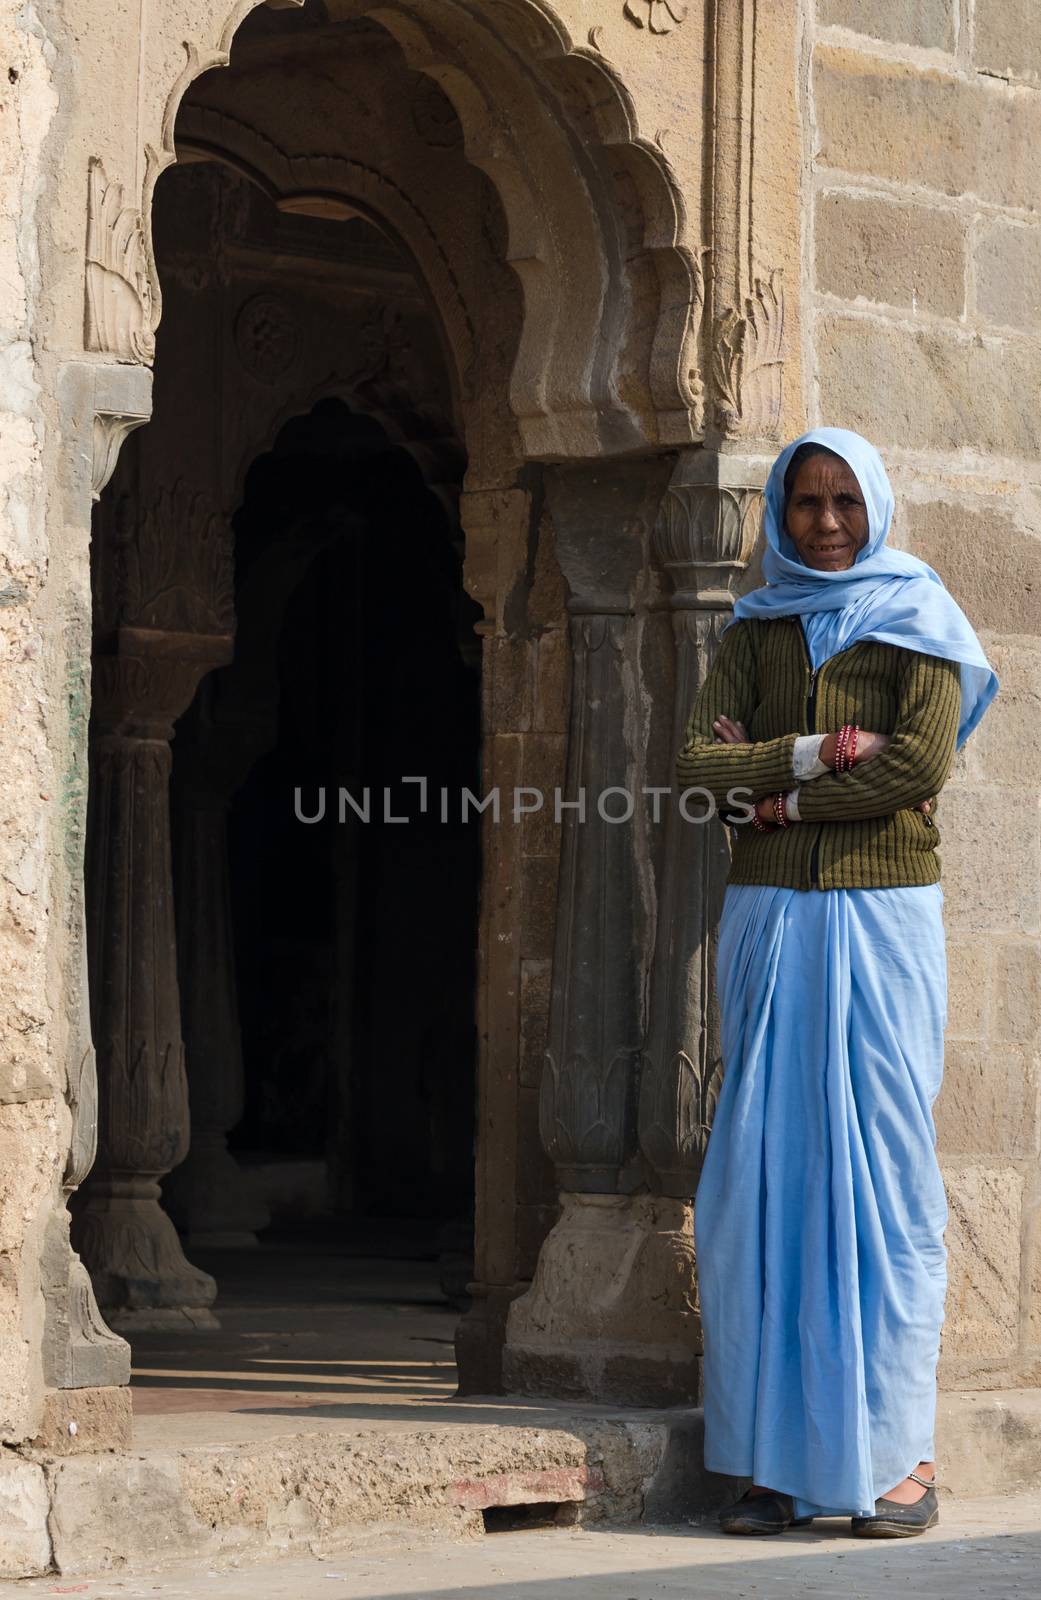 Jaipur, India - December 30, 2014: Unknown indian people live in Chand Baori Stepwell, Jaipur by siraanamwong